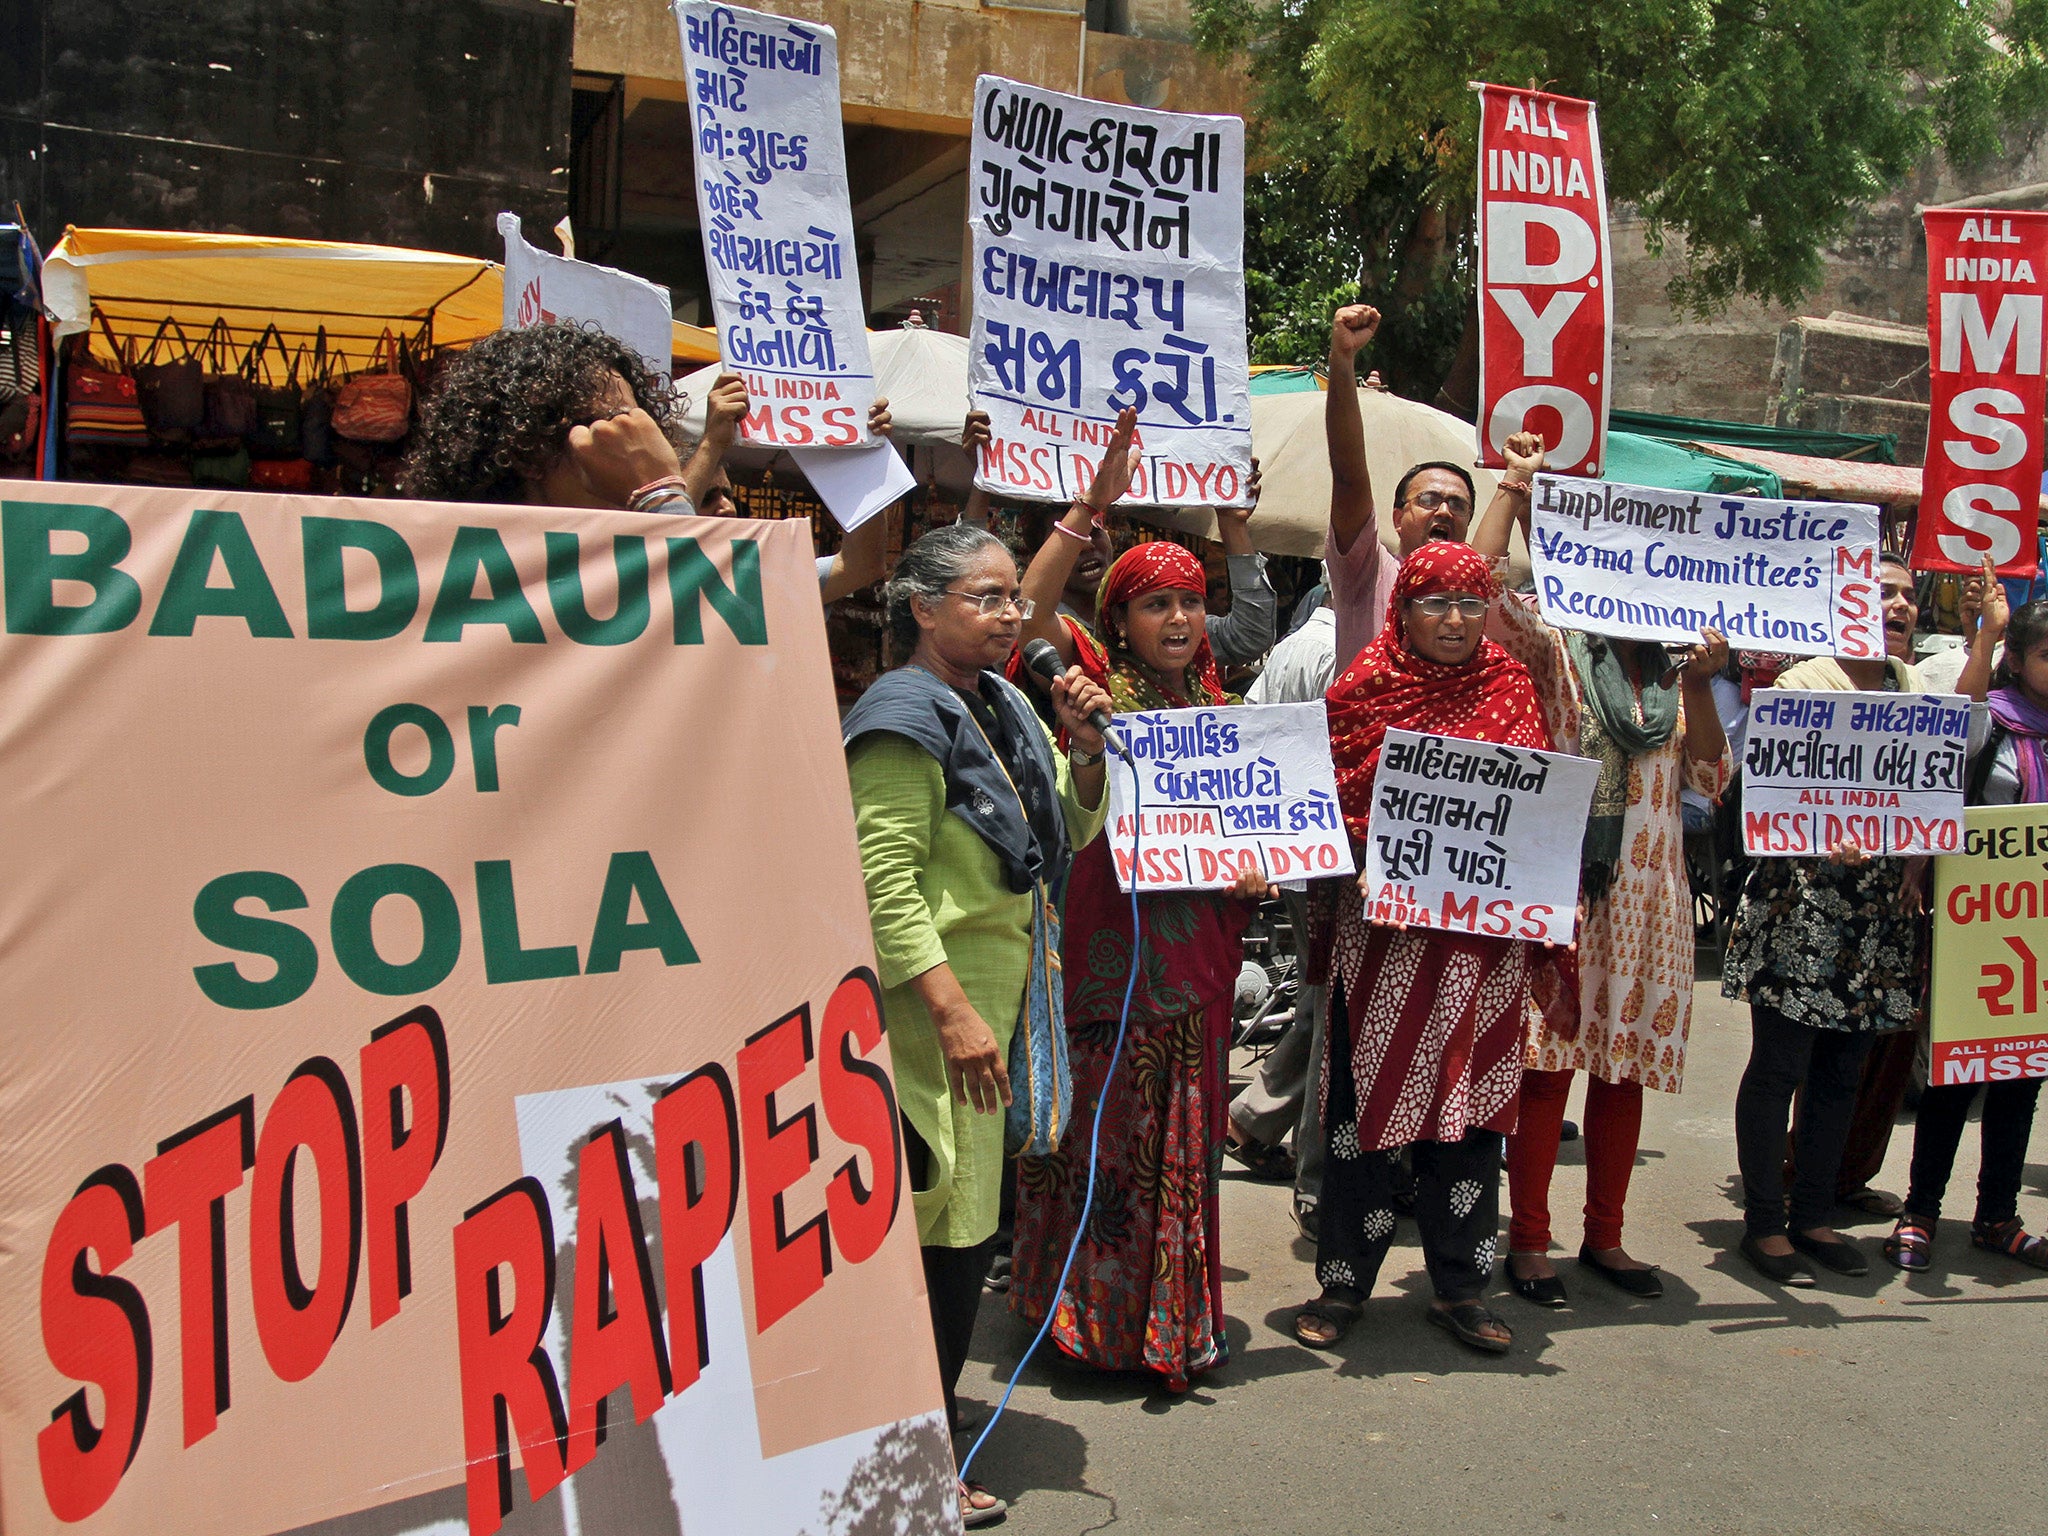 Women in India protest against rape and other attacks on women and girls in the country.